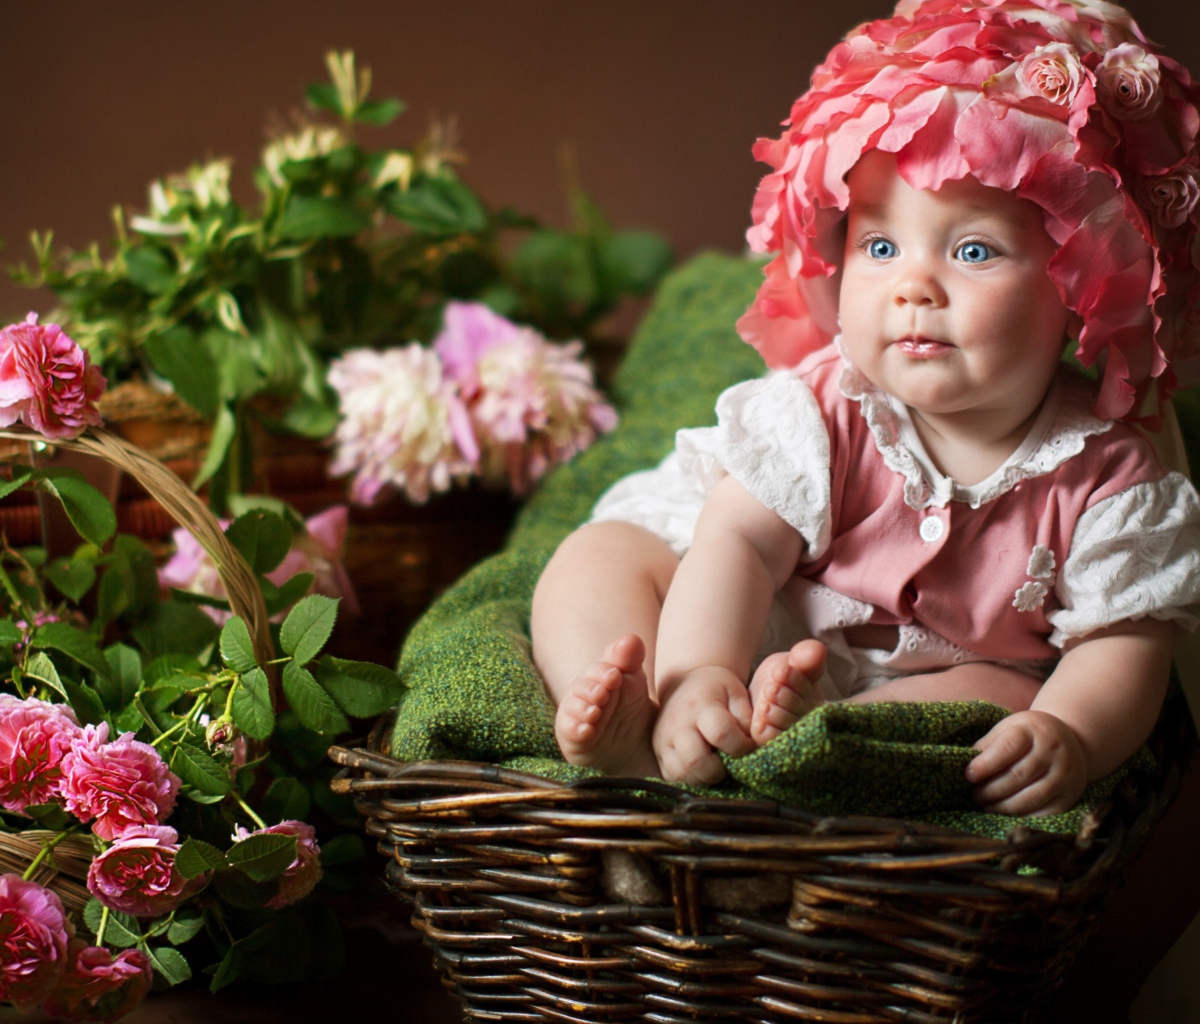 Cute Baby With Blue Eyes And Roses screenshot #1 1200x1024